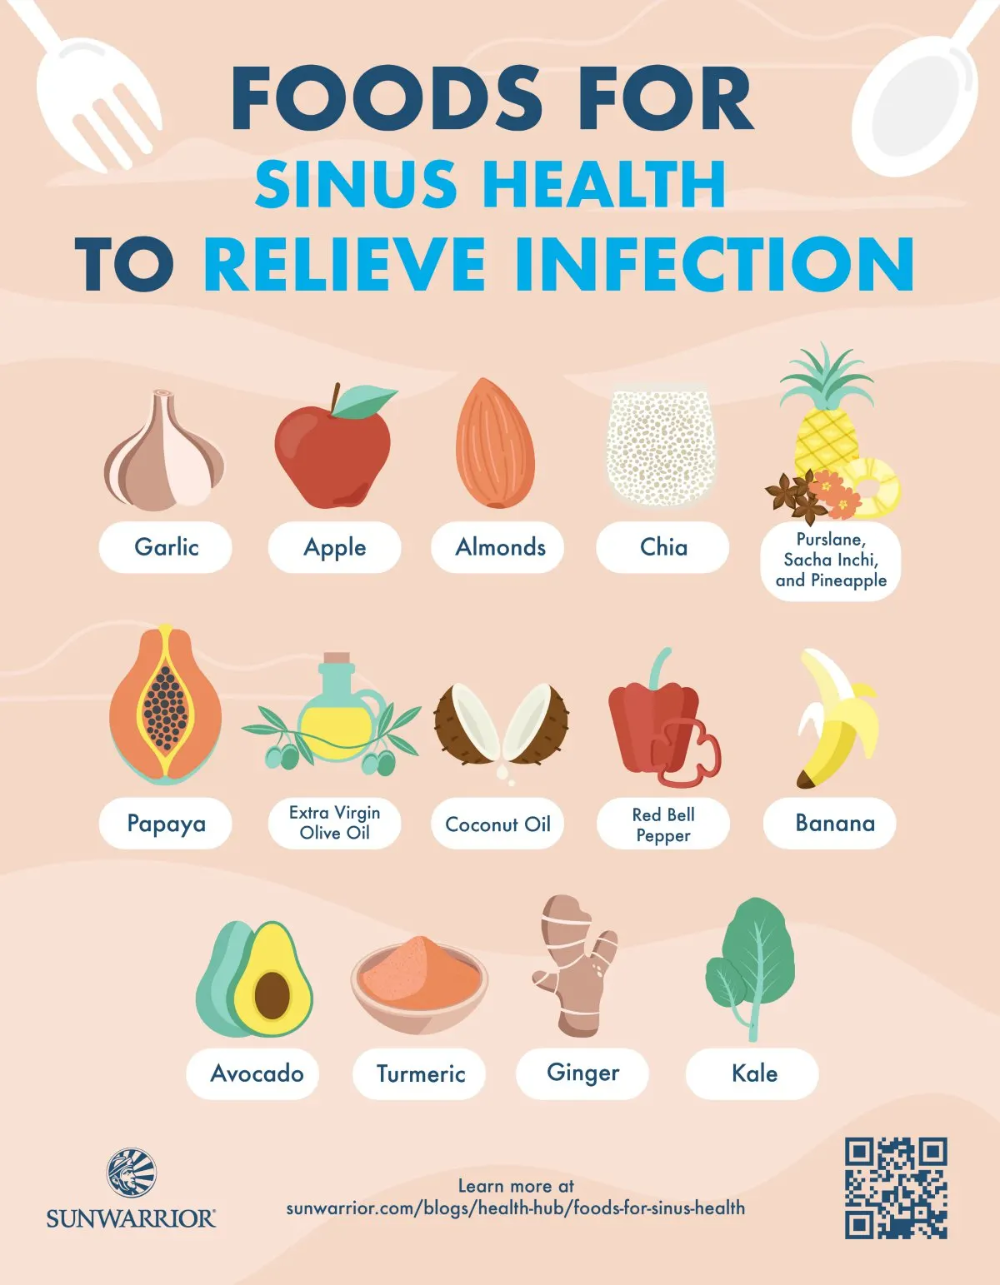 10 Foods For Sinus Health & 10 Ways To Relieve Infection [INFOGRAPHIC]